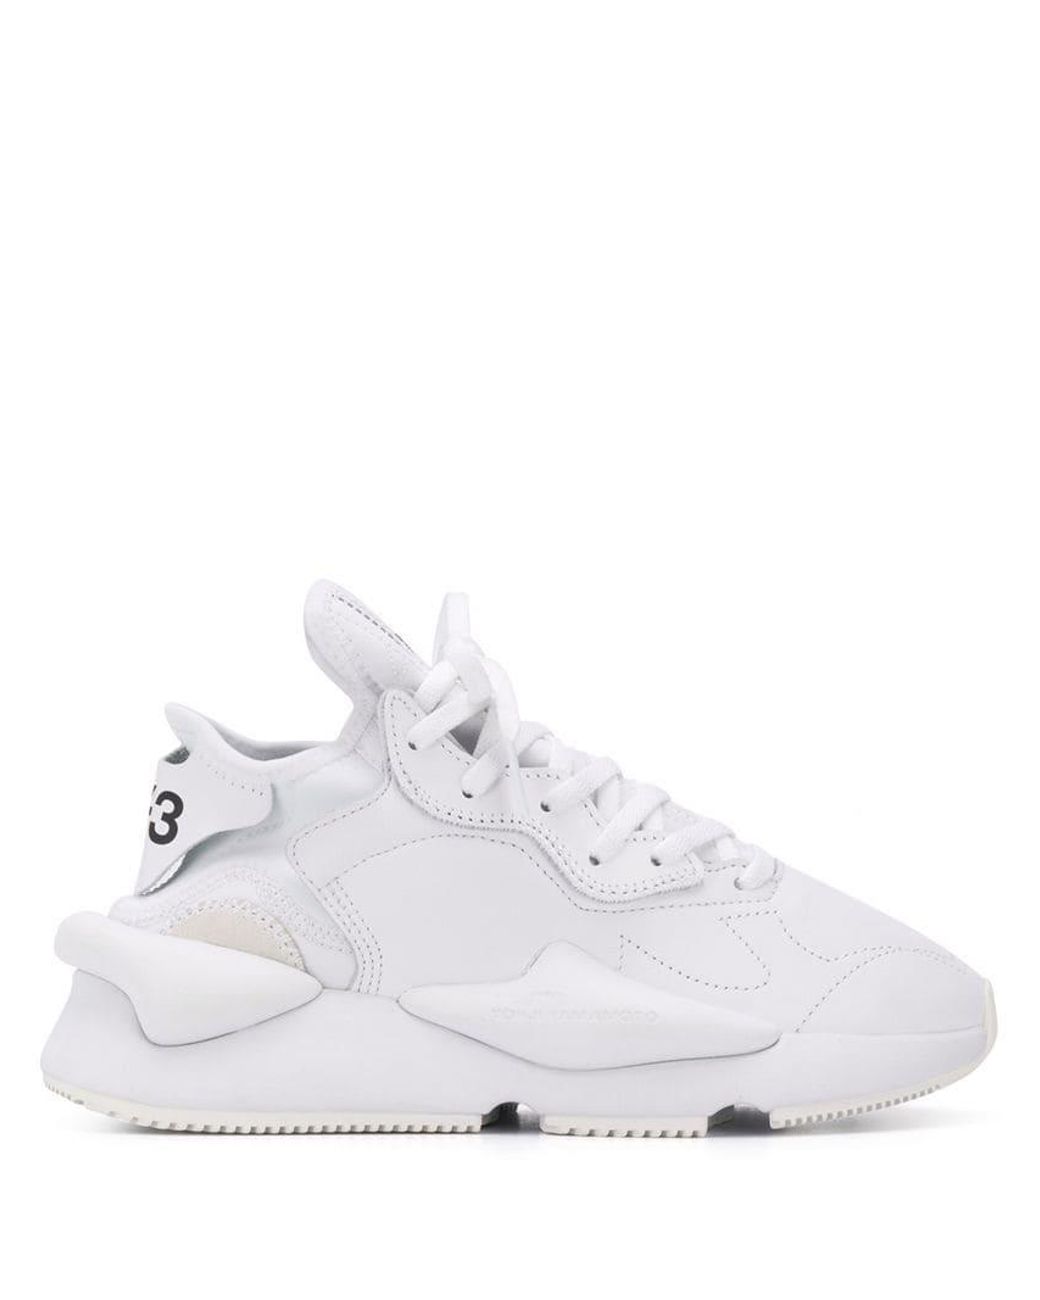 Y-3 Leather Adidas Kaiwa Sneakers in White | Lyst